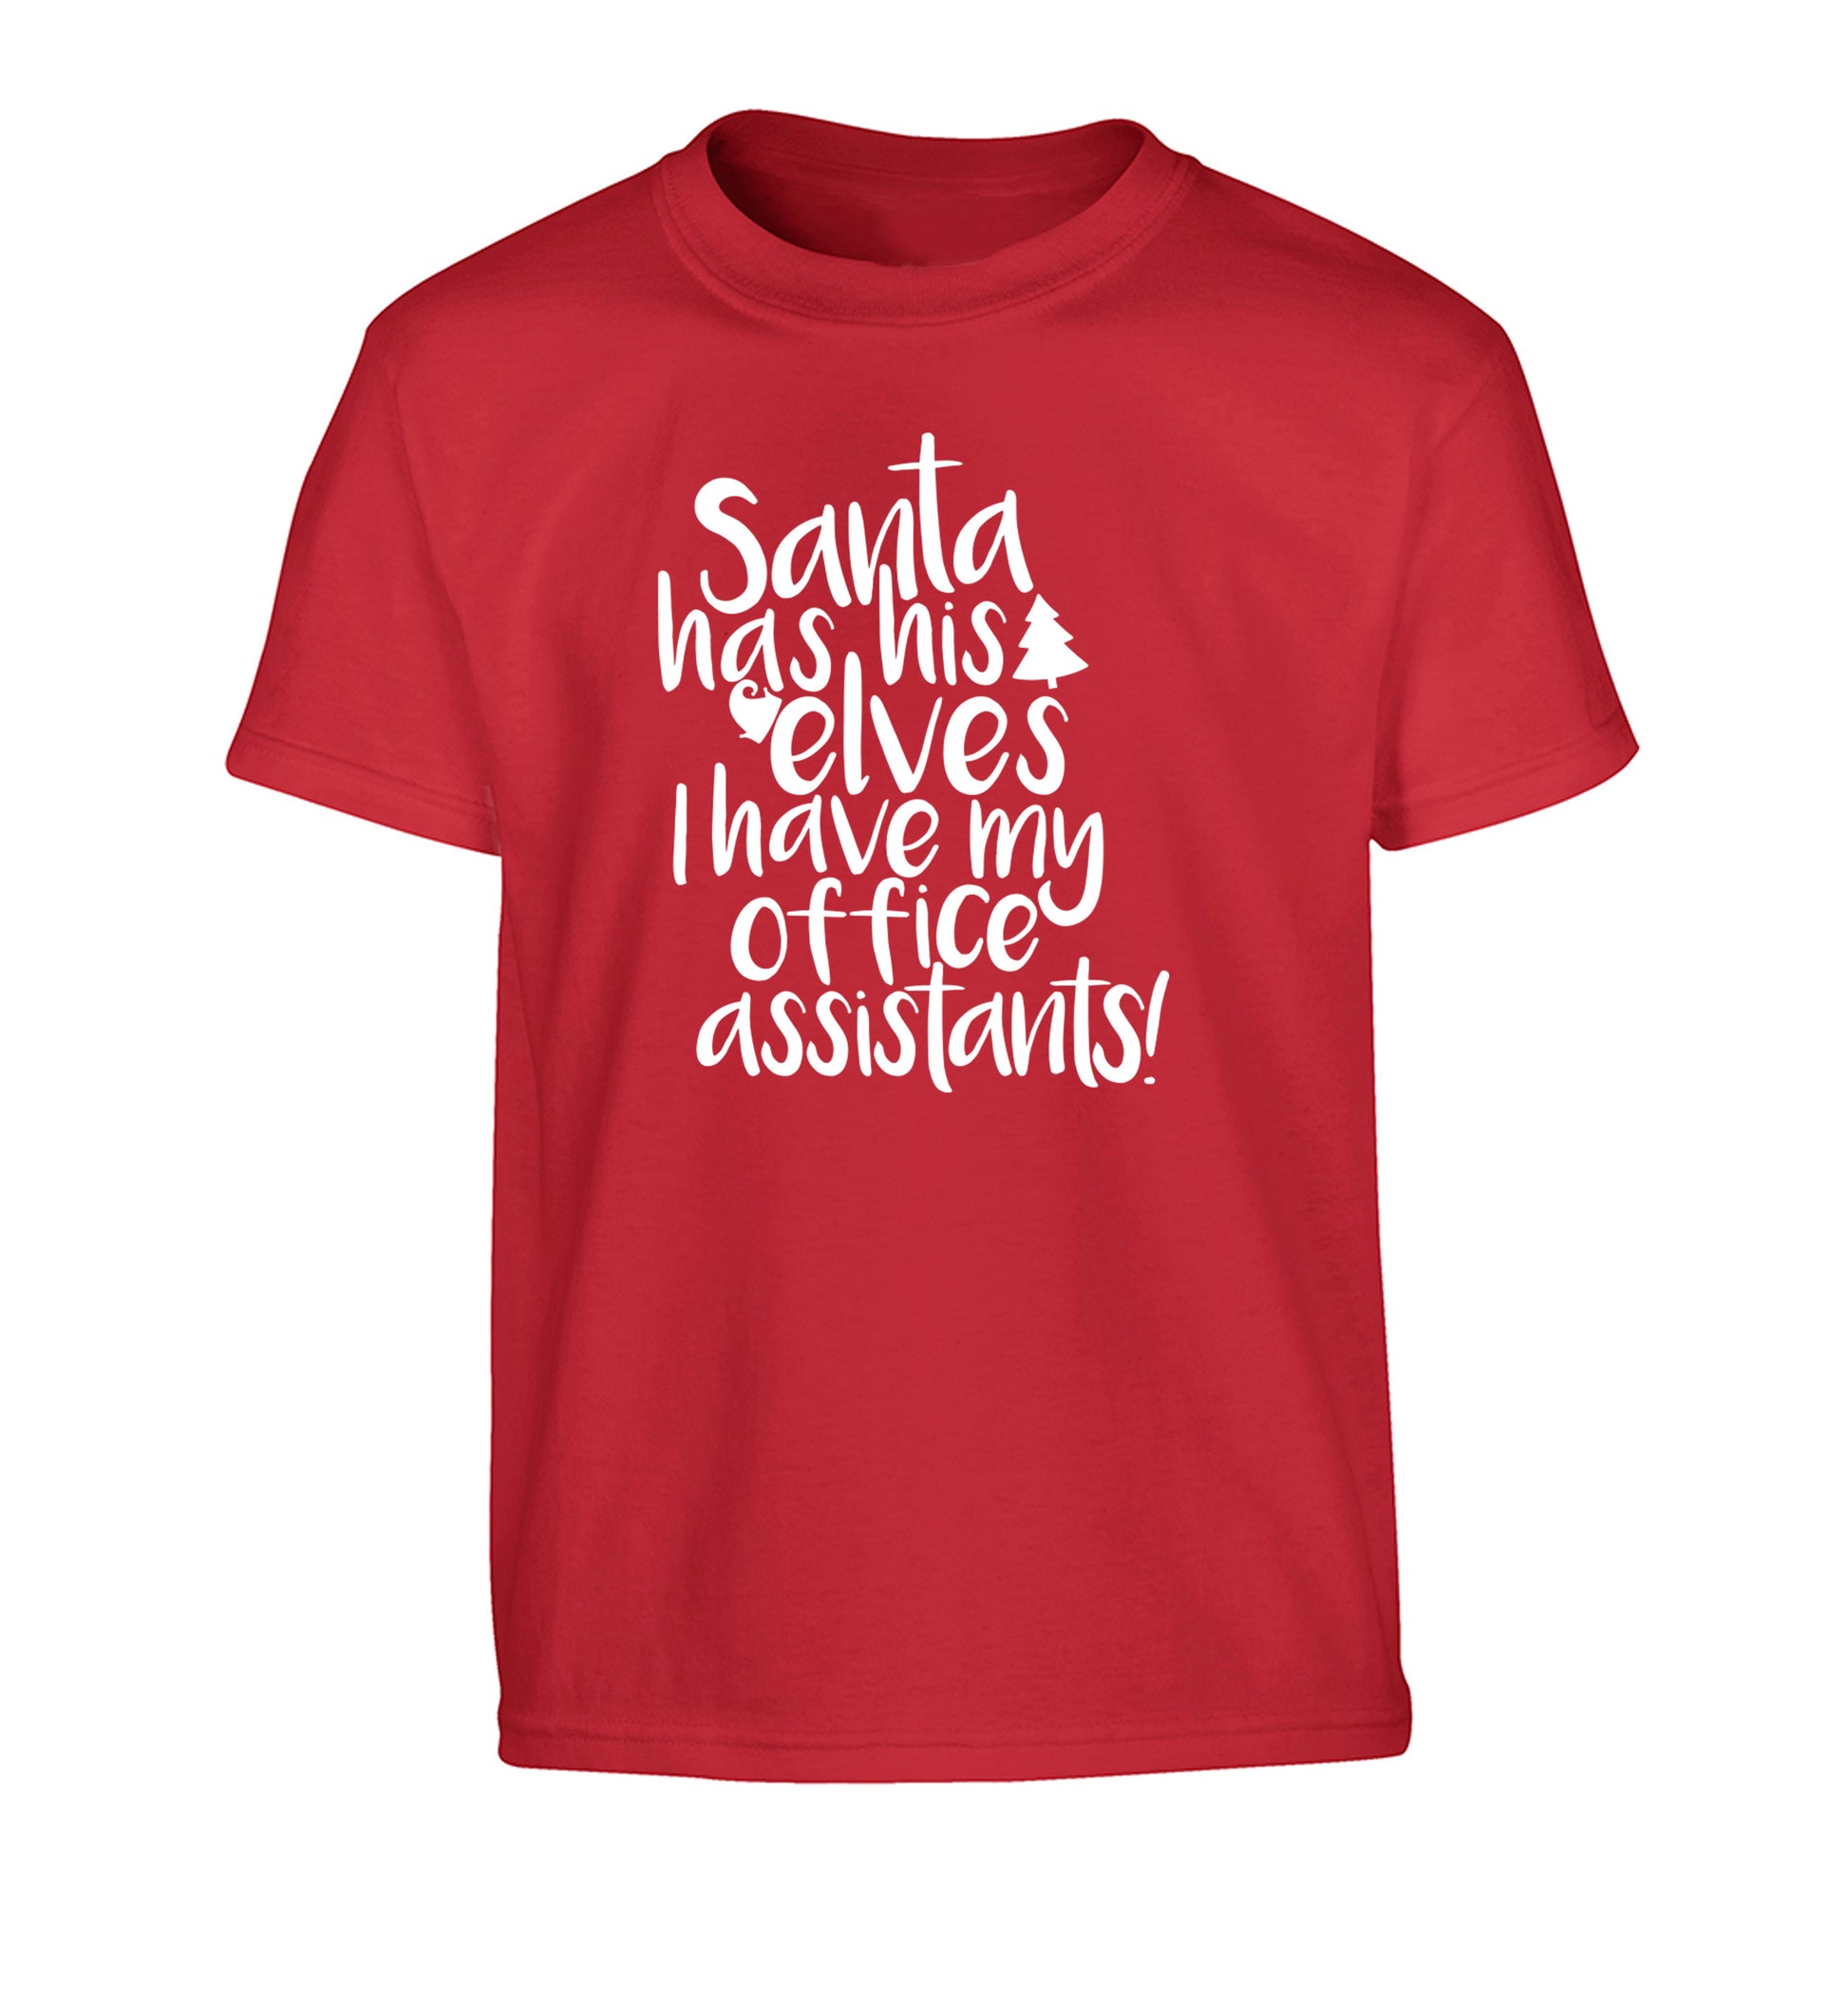 Santa has elves I have office assistants Children's red Tshirt 12-13 Years